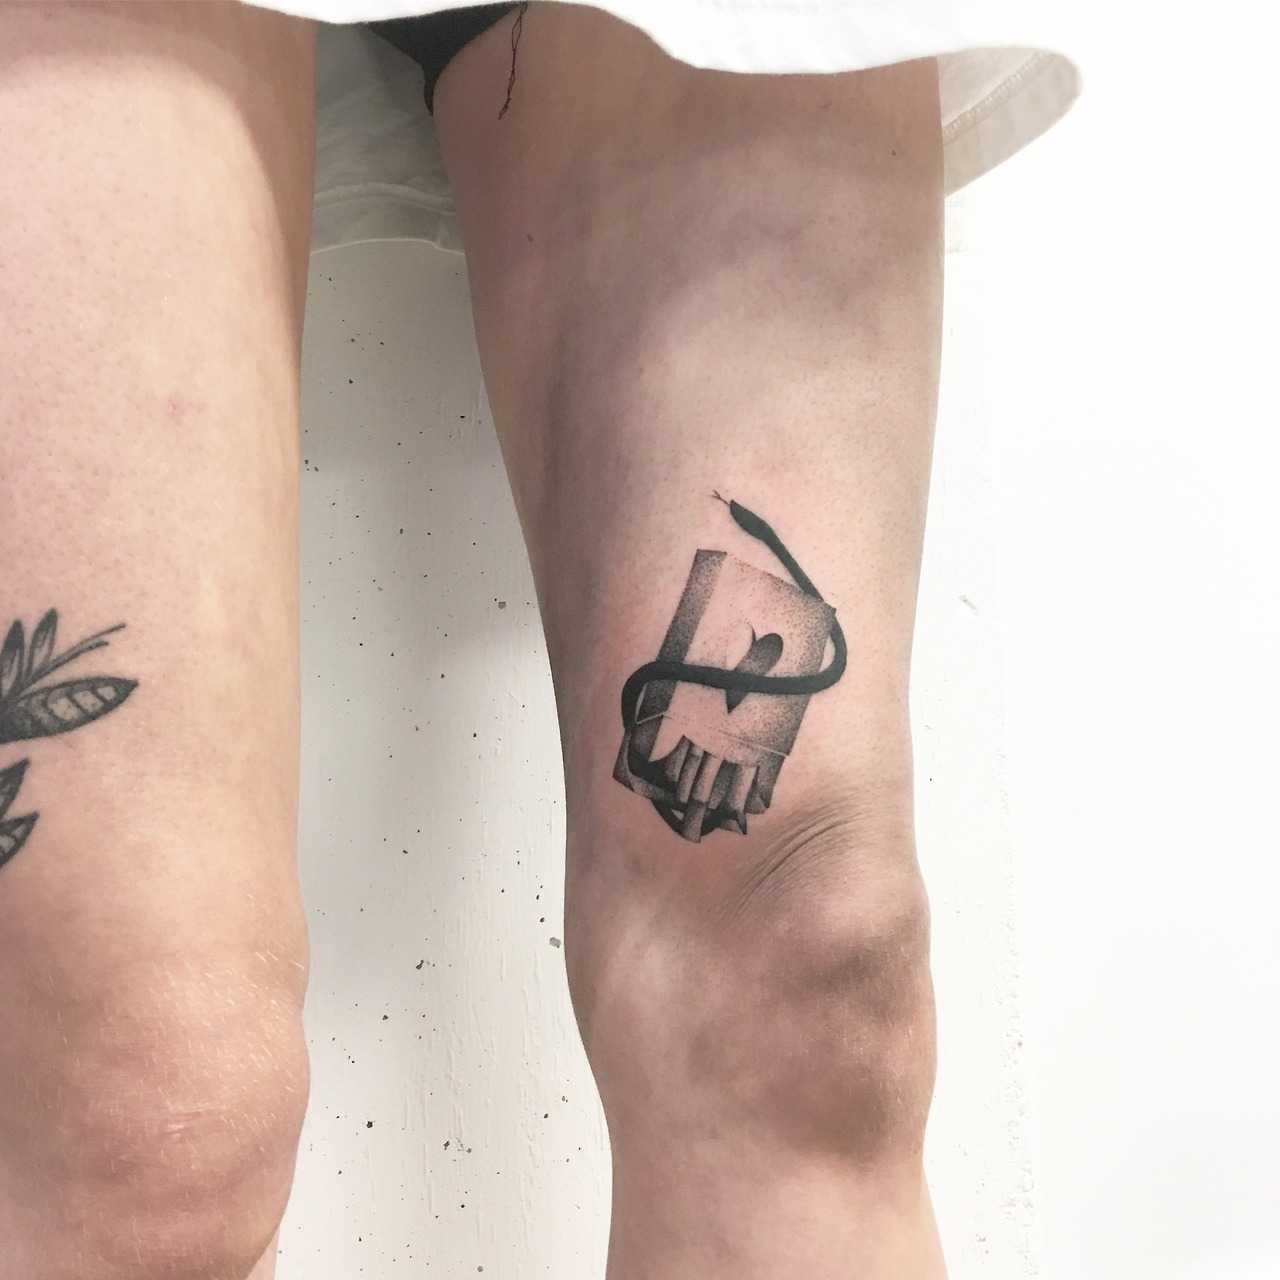 Pack of cigarettes tattoo by Bad Luck Veteran